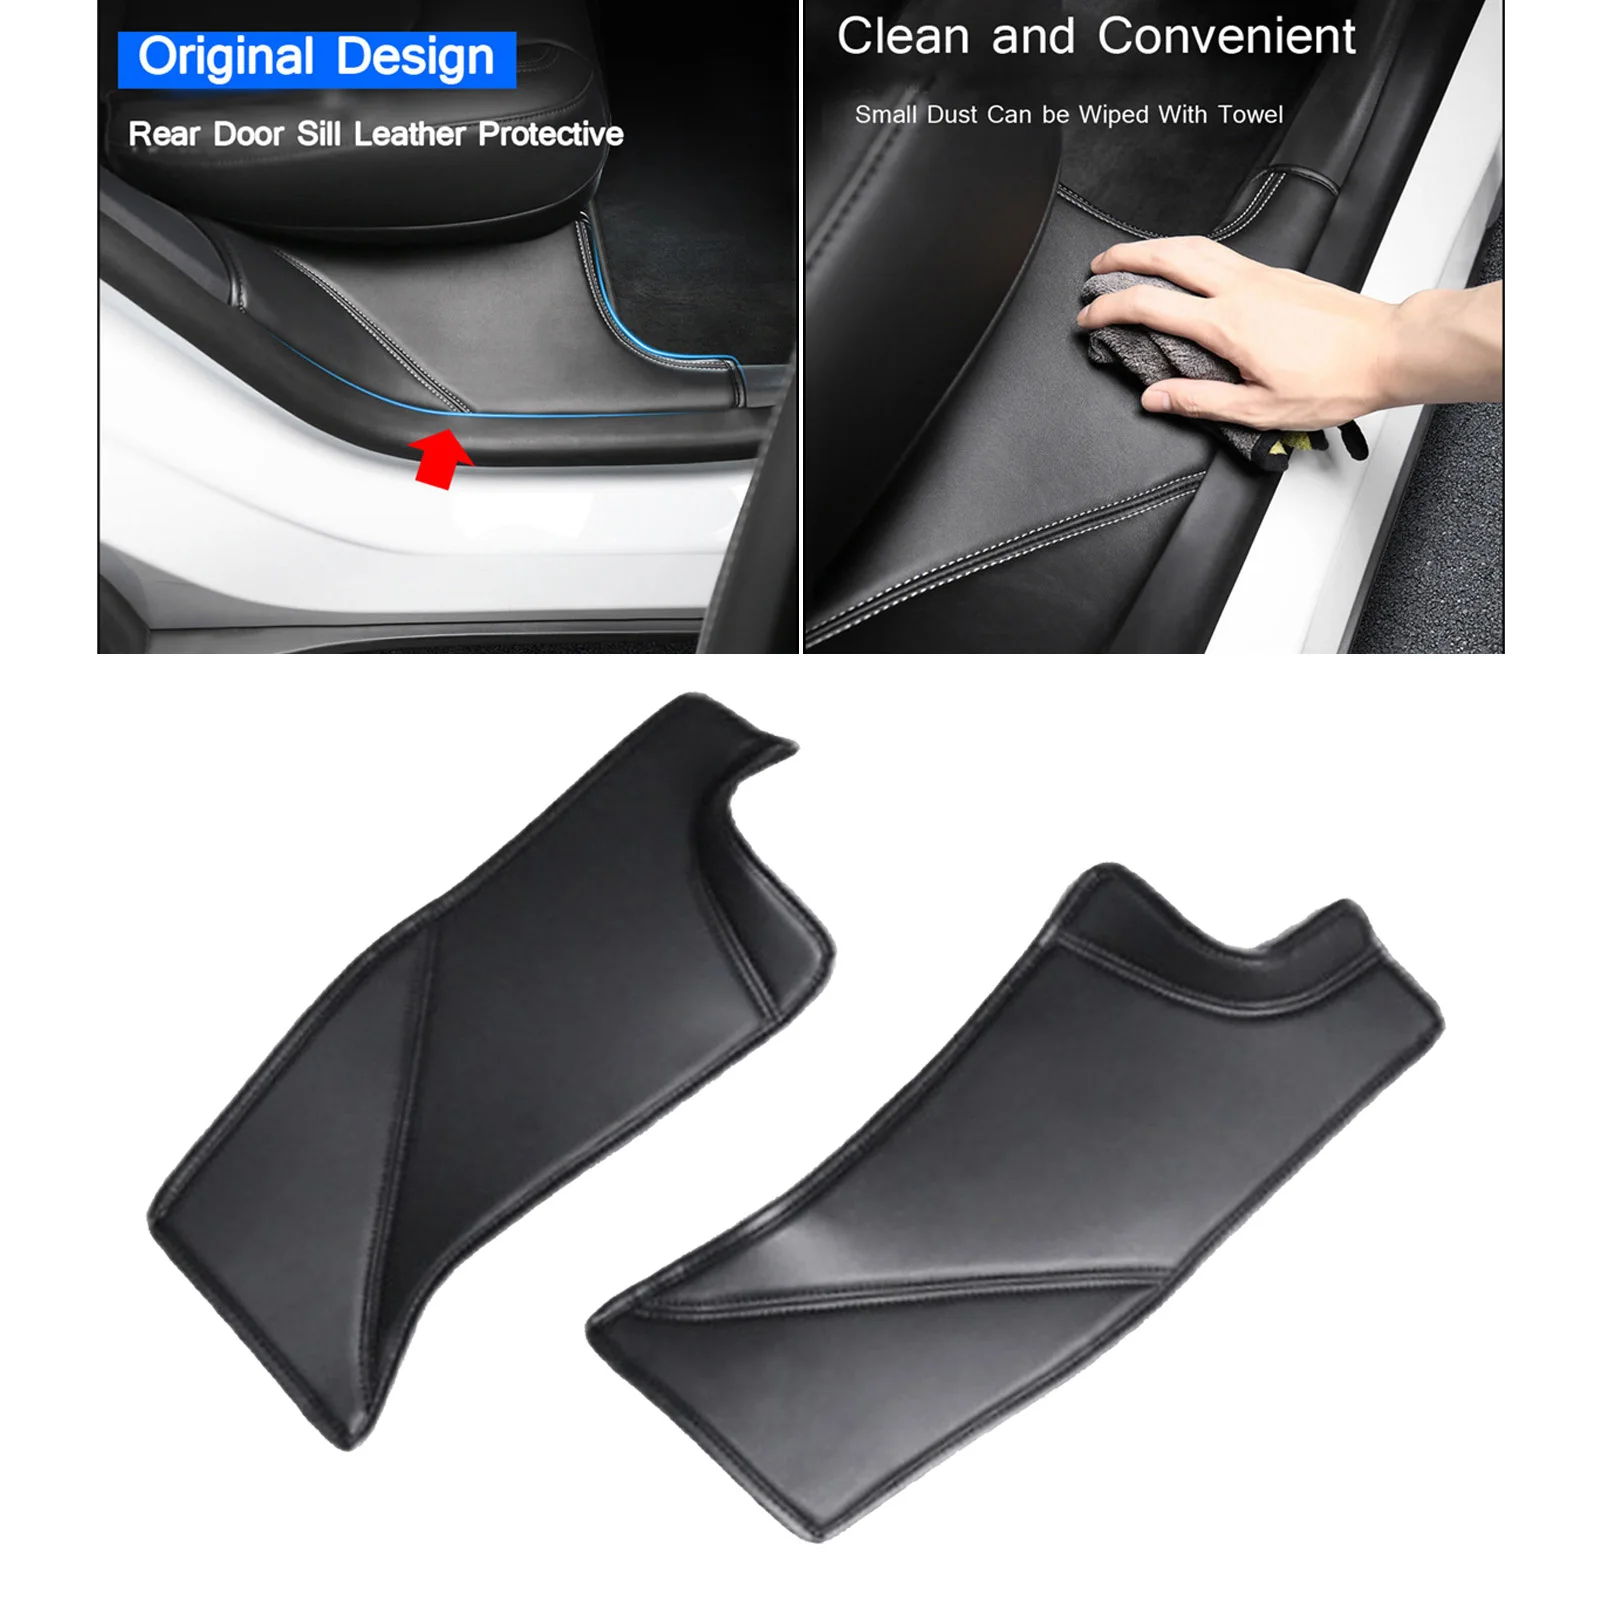 2x Car Rear Door Sill Protector Cover Trim for , PU Leather